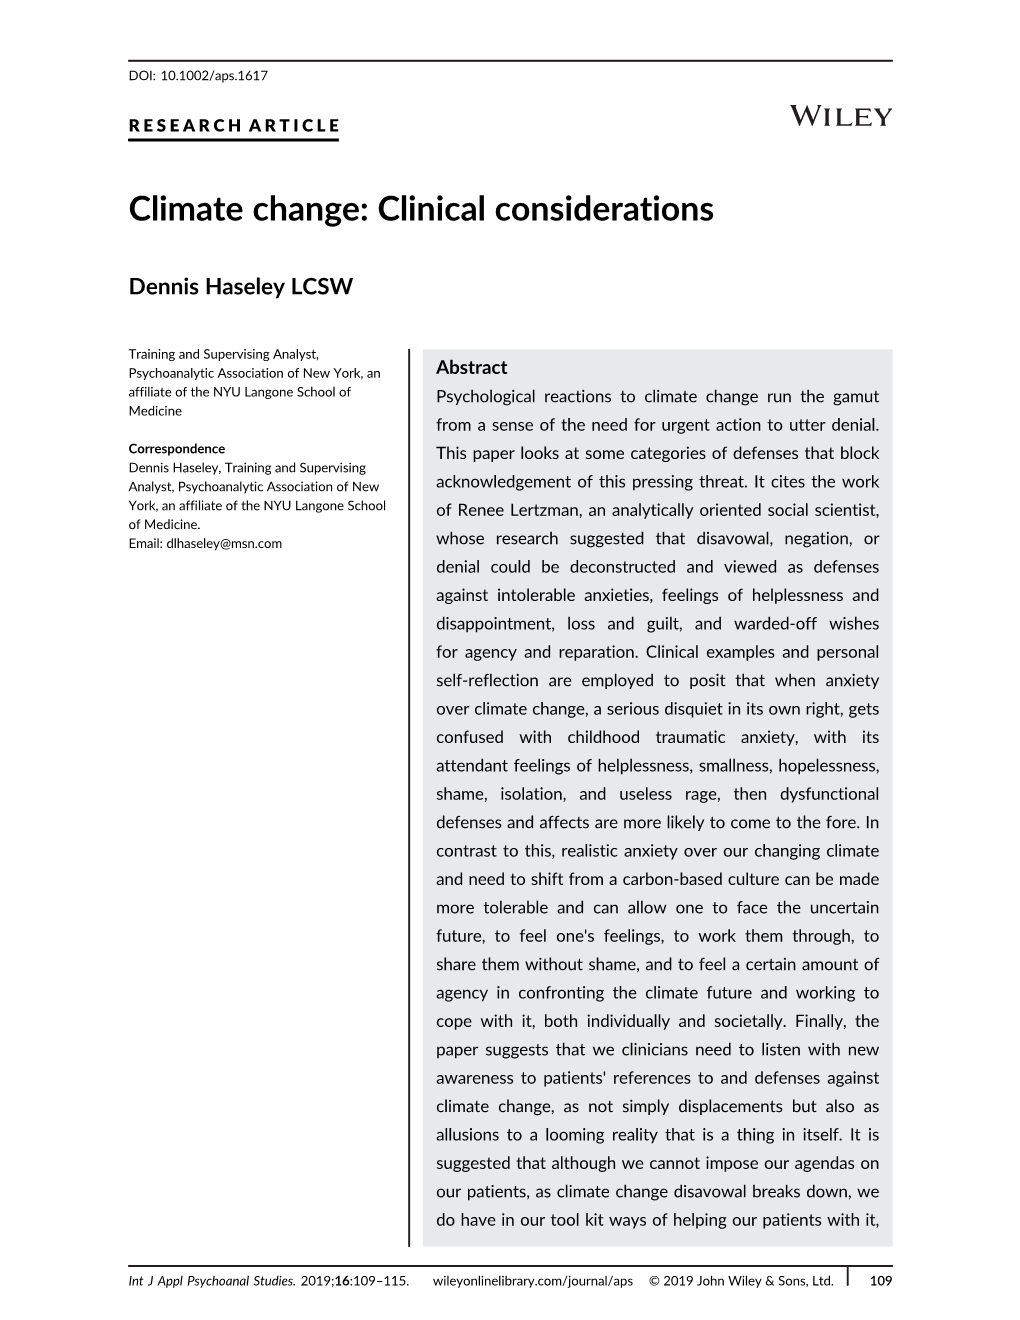 Climate Change: Clinical Considerations